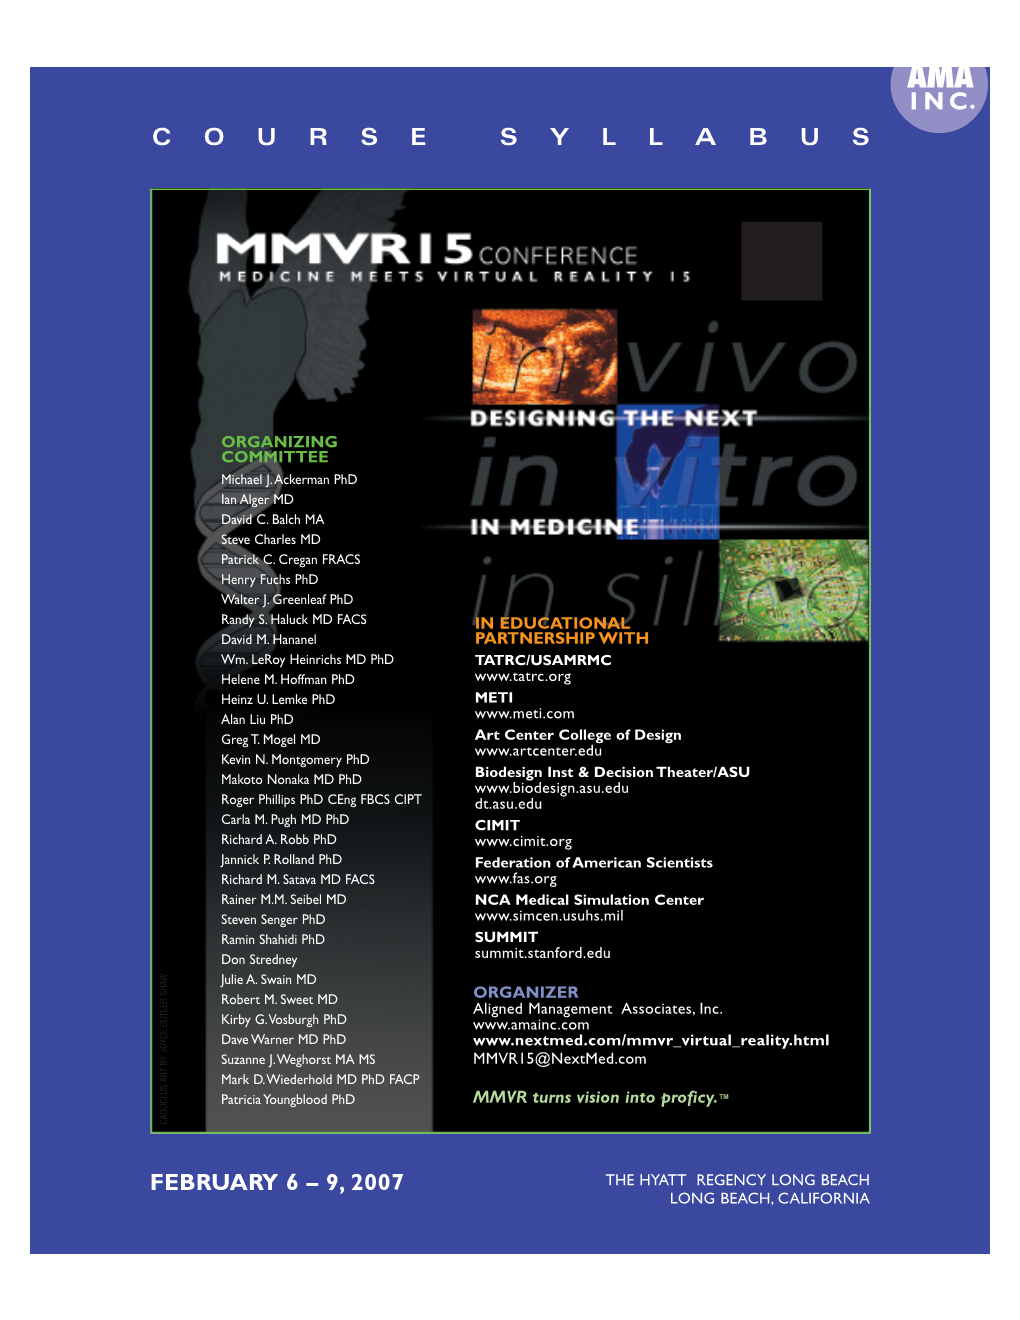 MMVR 15 Organizing Committee